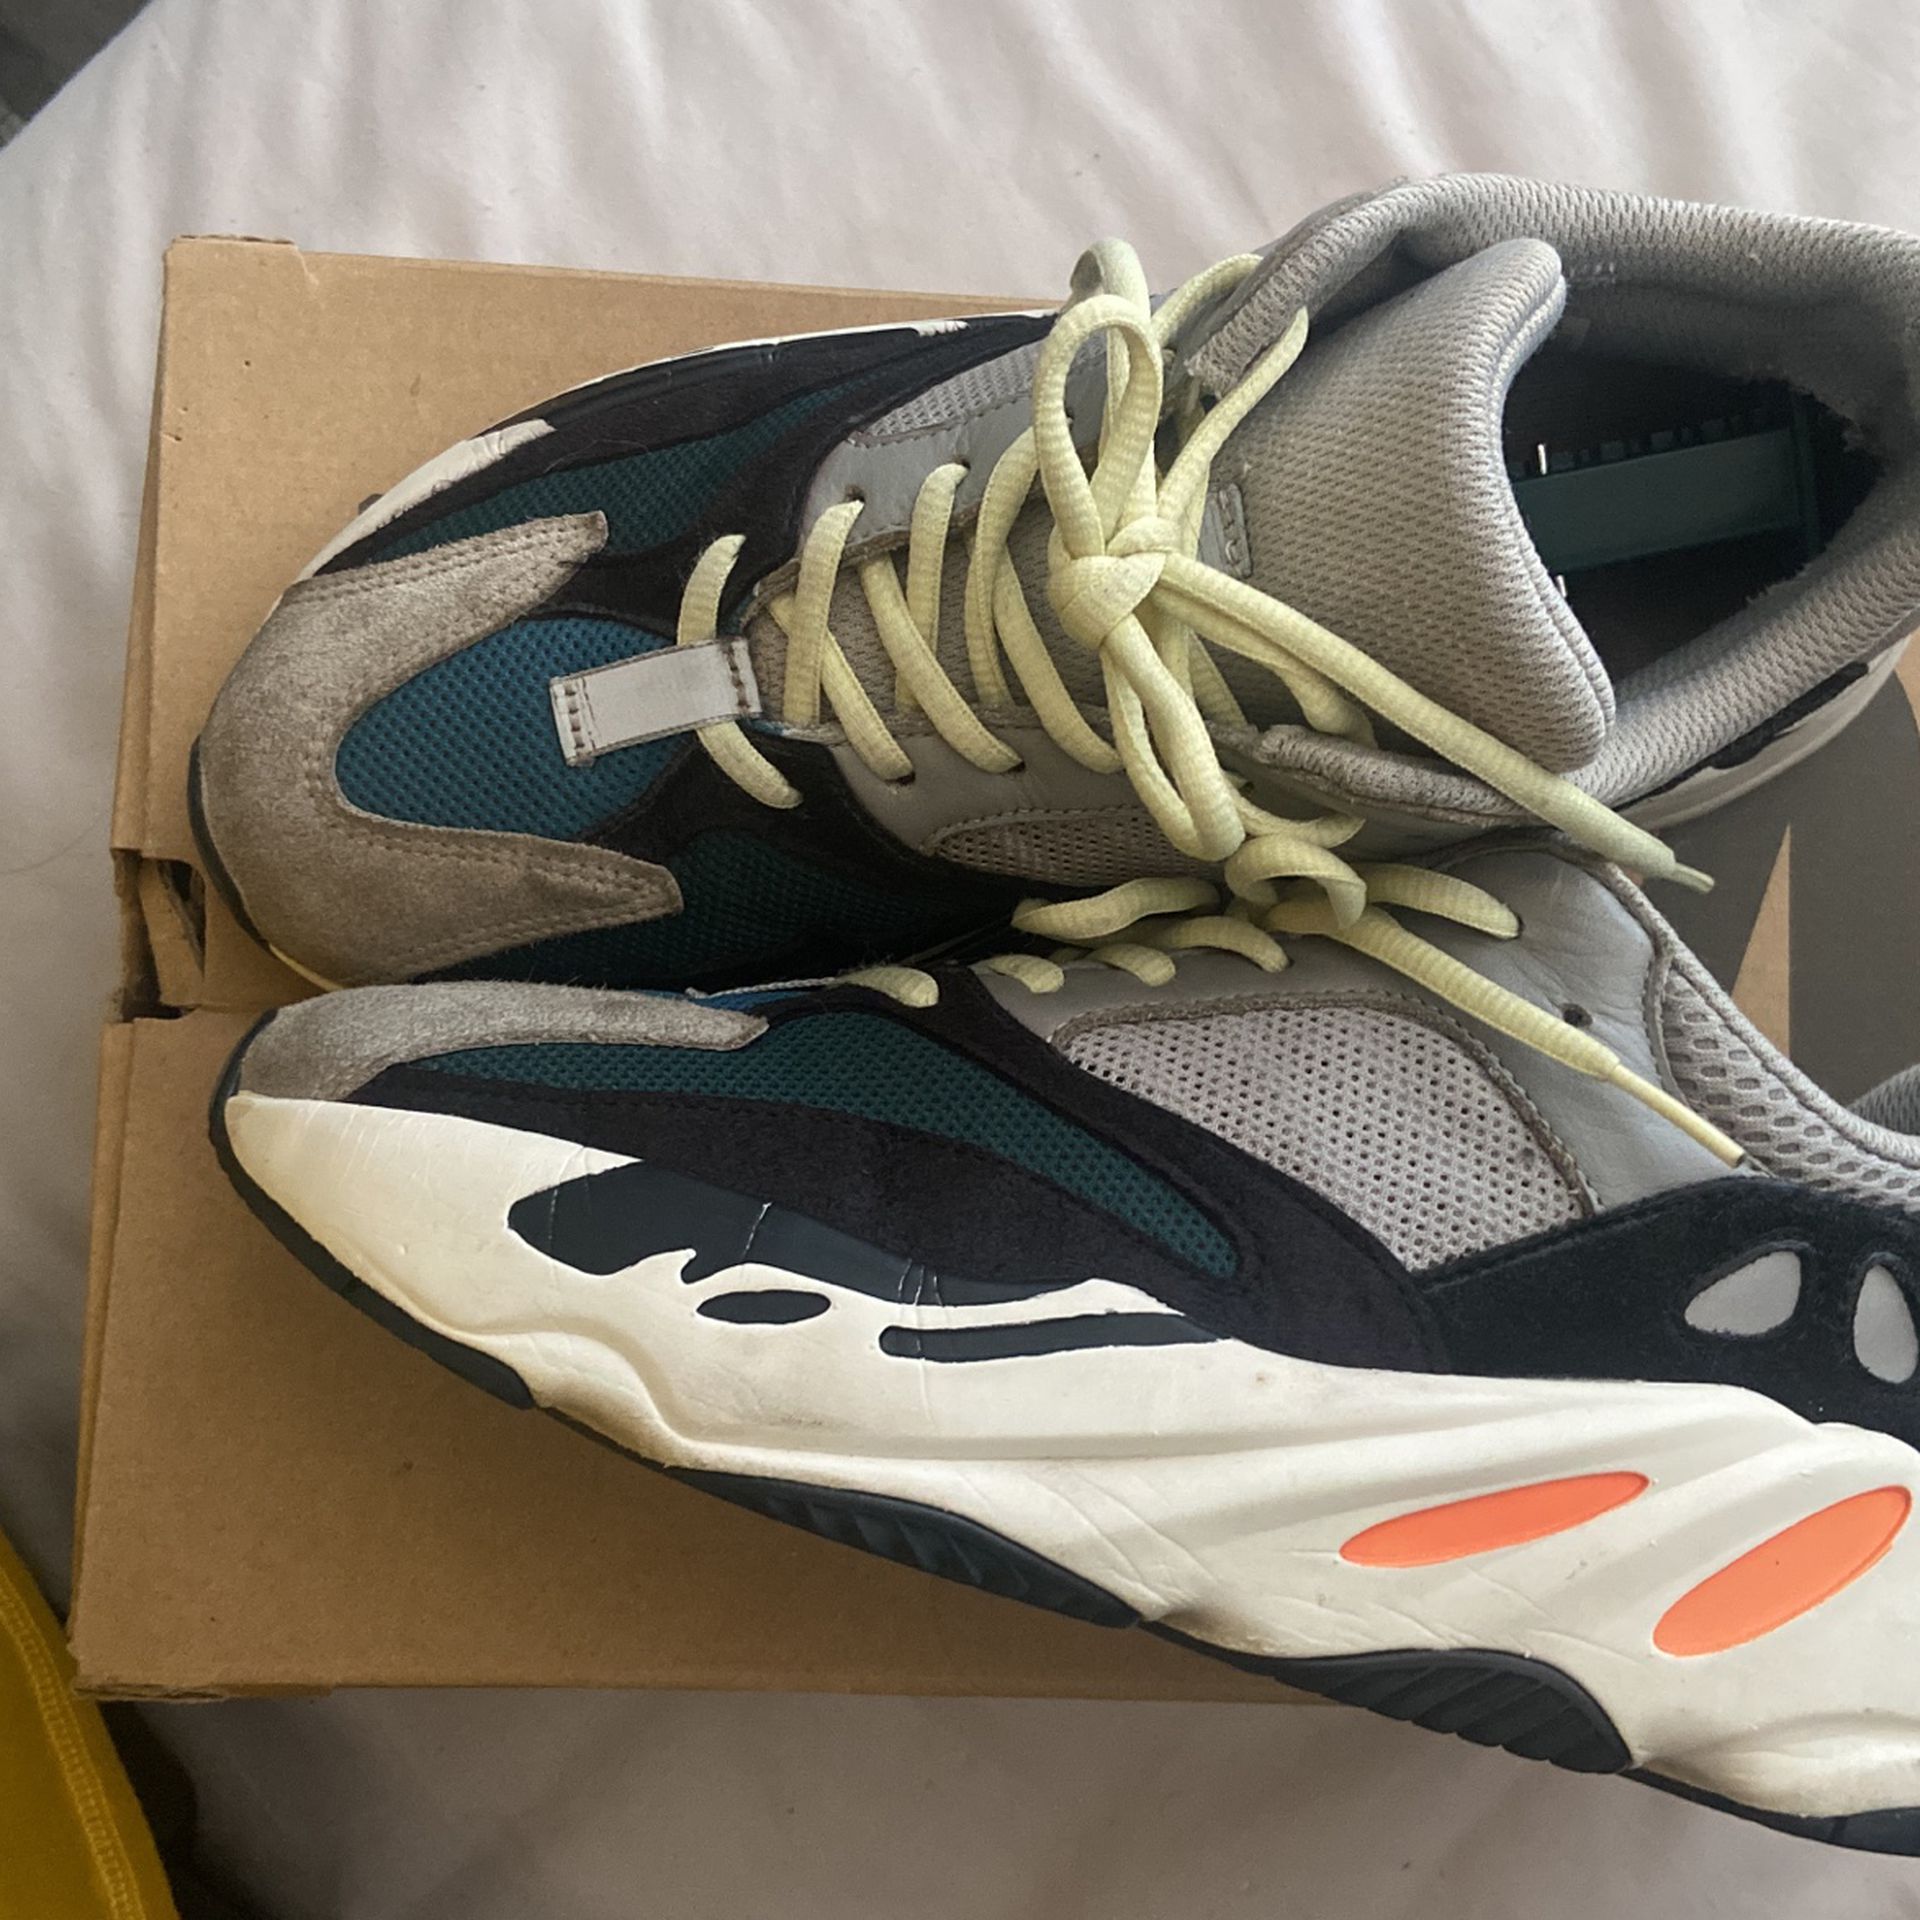 Adidas Yeezy Boost 700 Waverunners Size 8.5 for Sale in Houston, TX ...